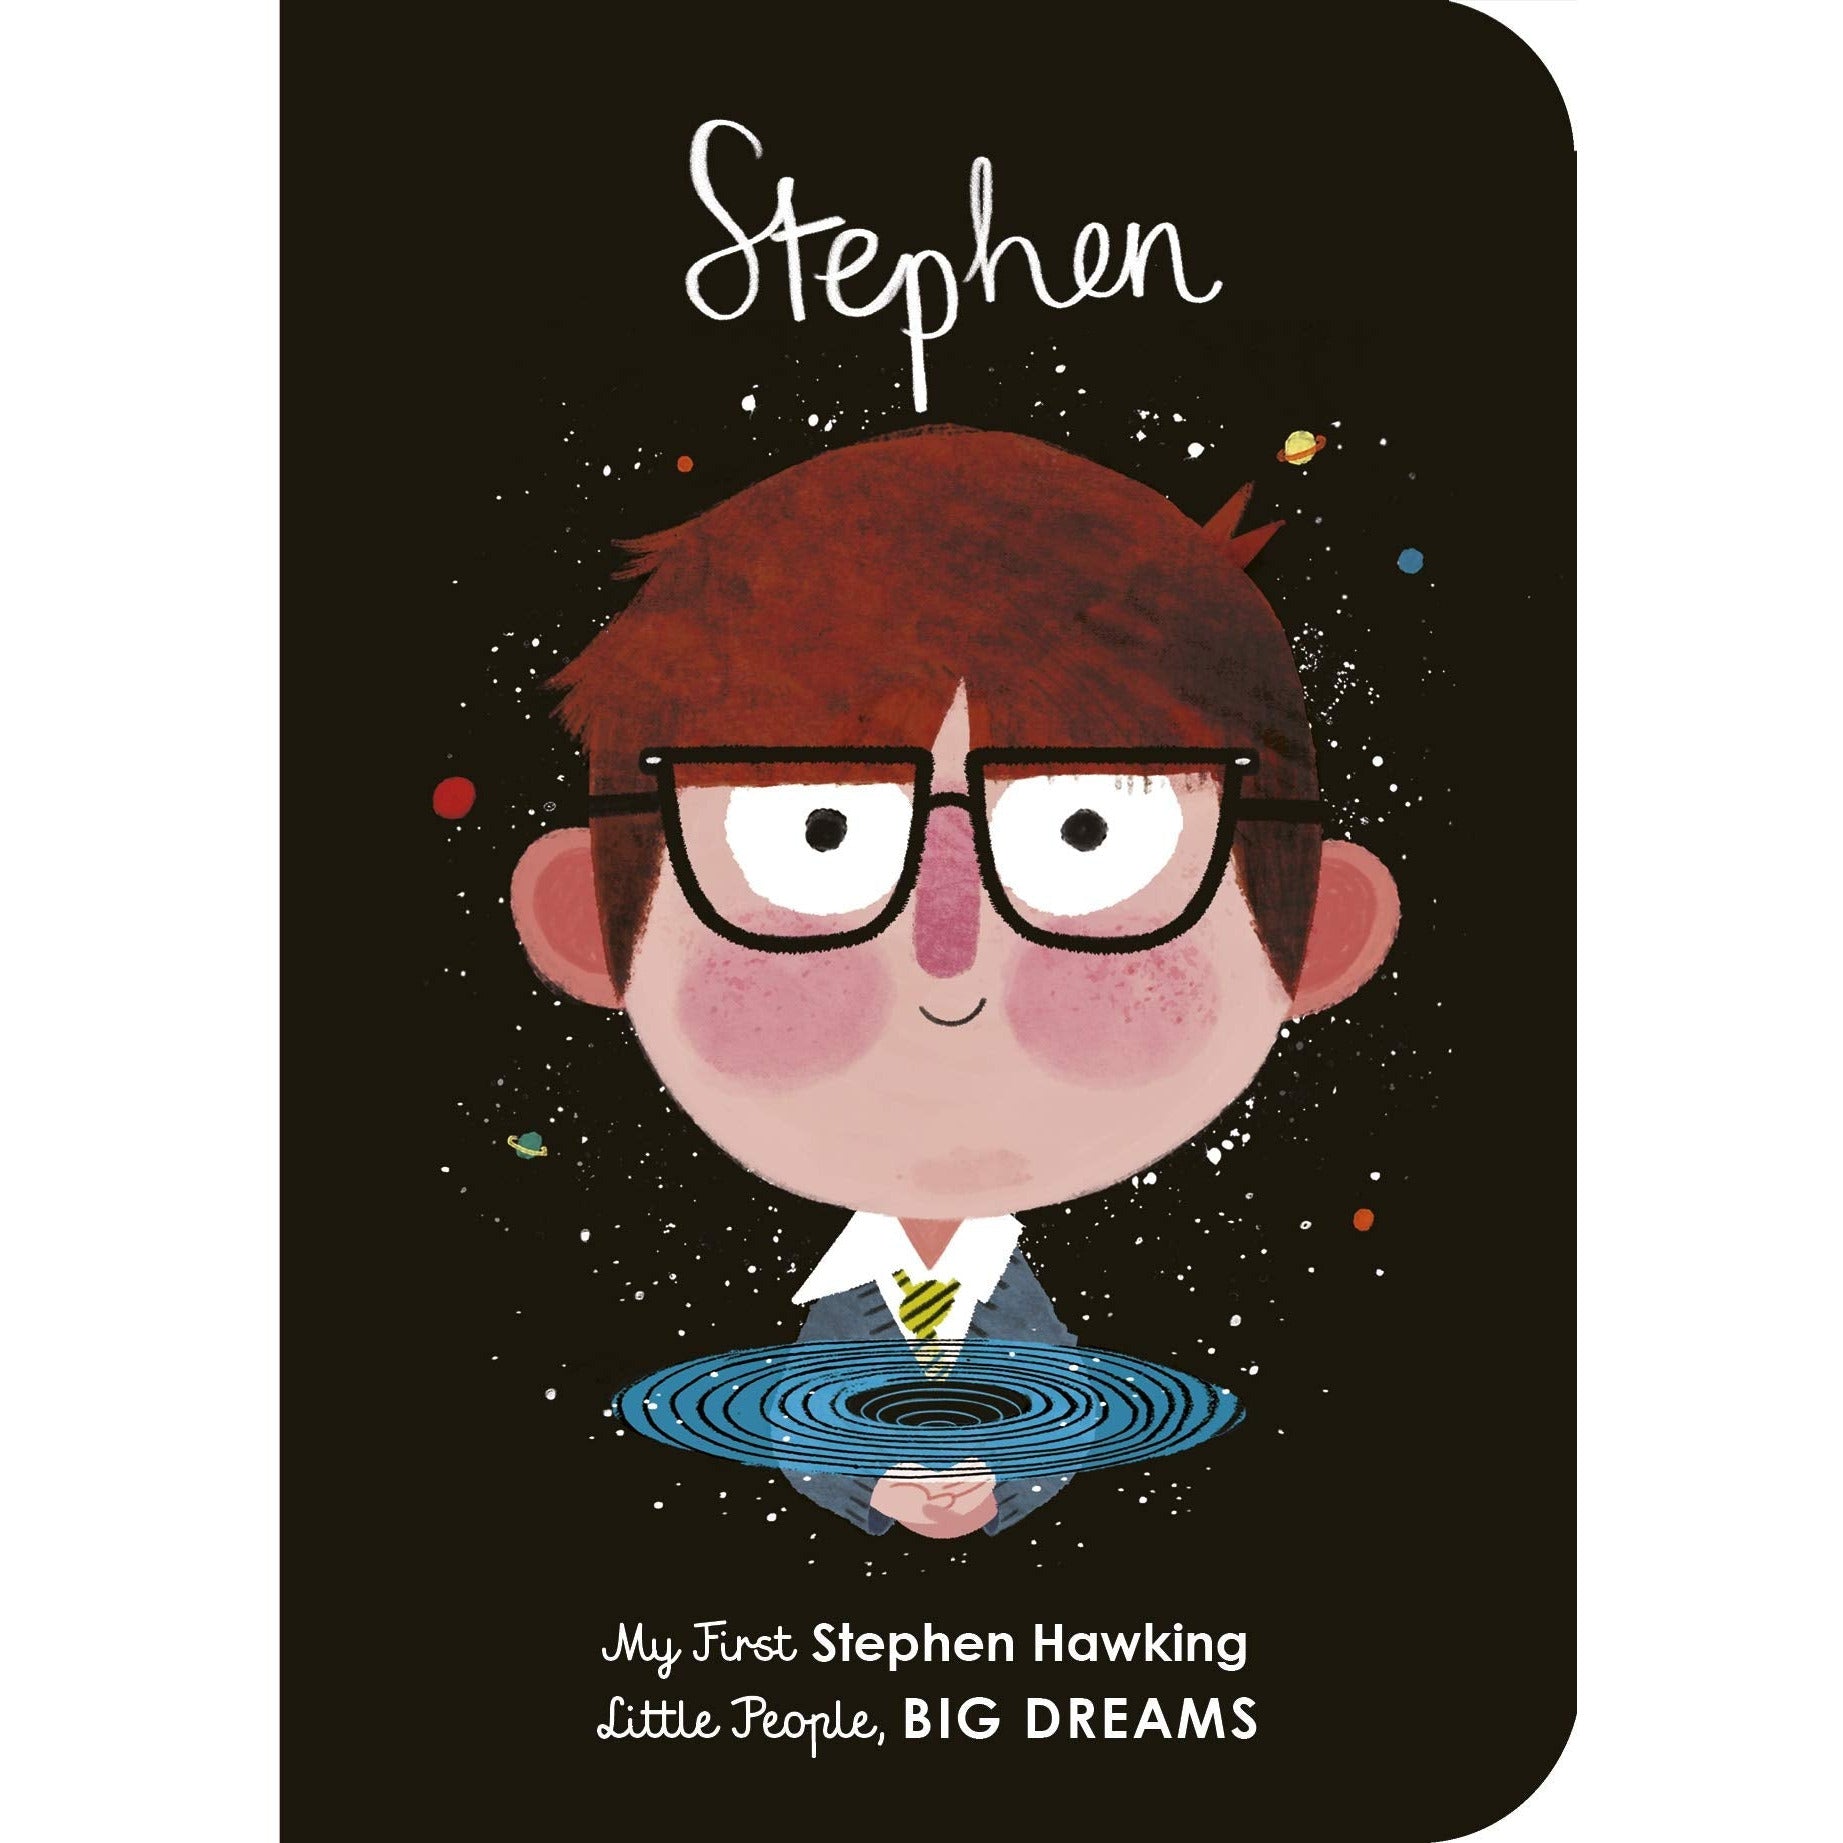 Stephen Hawking - My First Little People BIG DREAMS - Muddy Boots Home UK